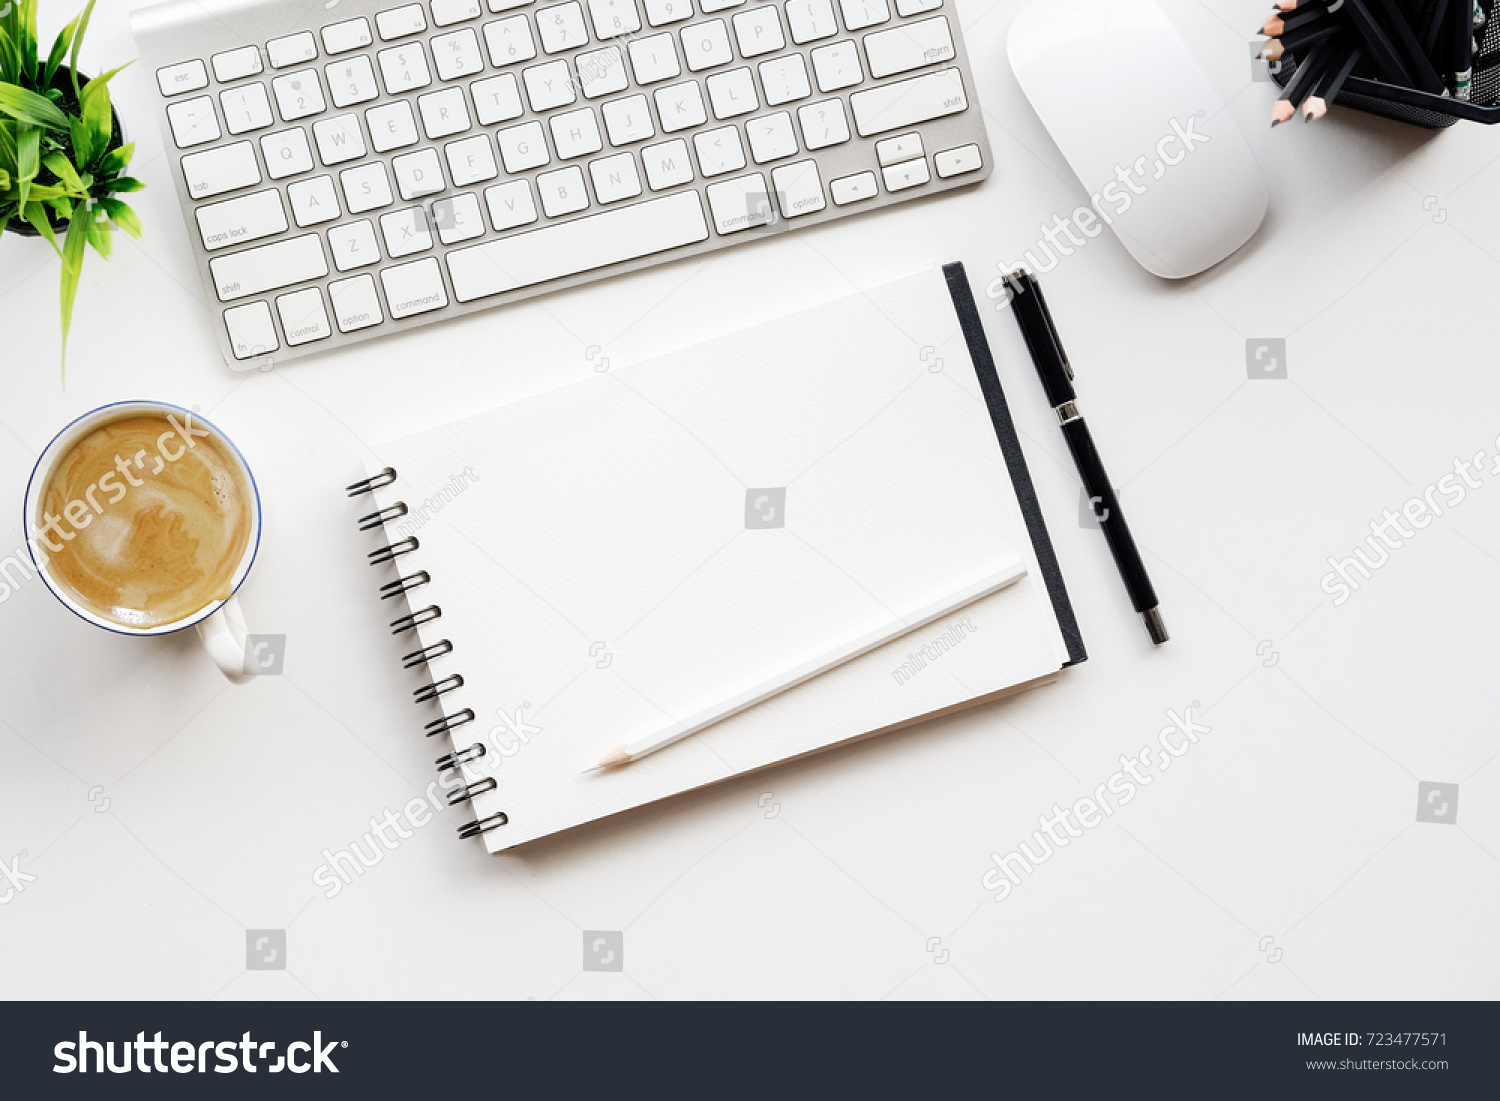 Stylish minimalistic workplace with keyboard, notebook, office plant, notebook, glasses in flat lay style. White background. Top view. #723477571